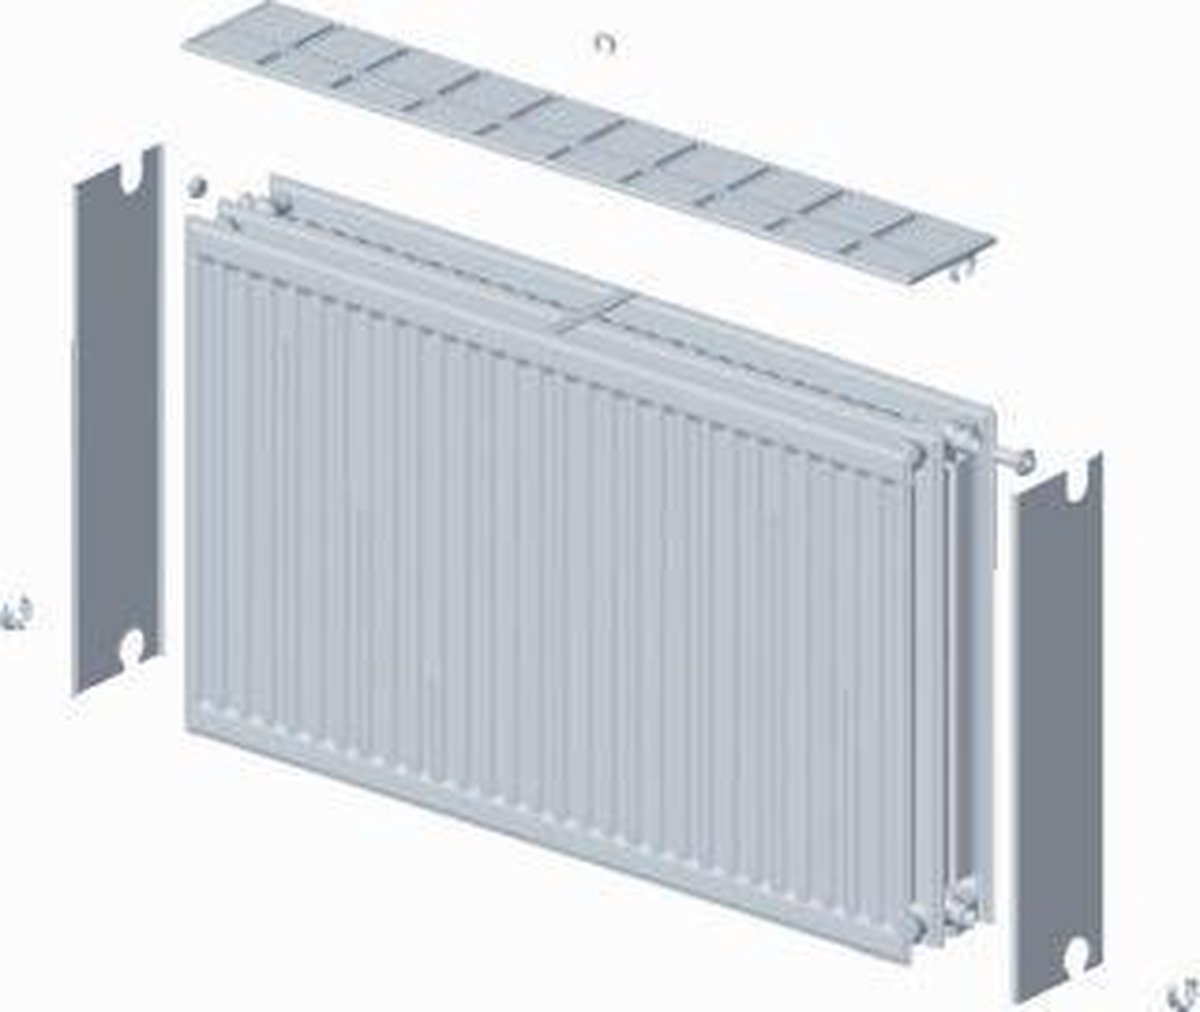 Stelrad paneelradiator Novello, staal, wit, (hxlxd) 500x1600x158mm, 33